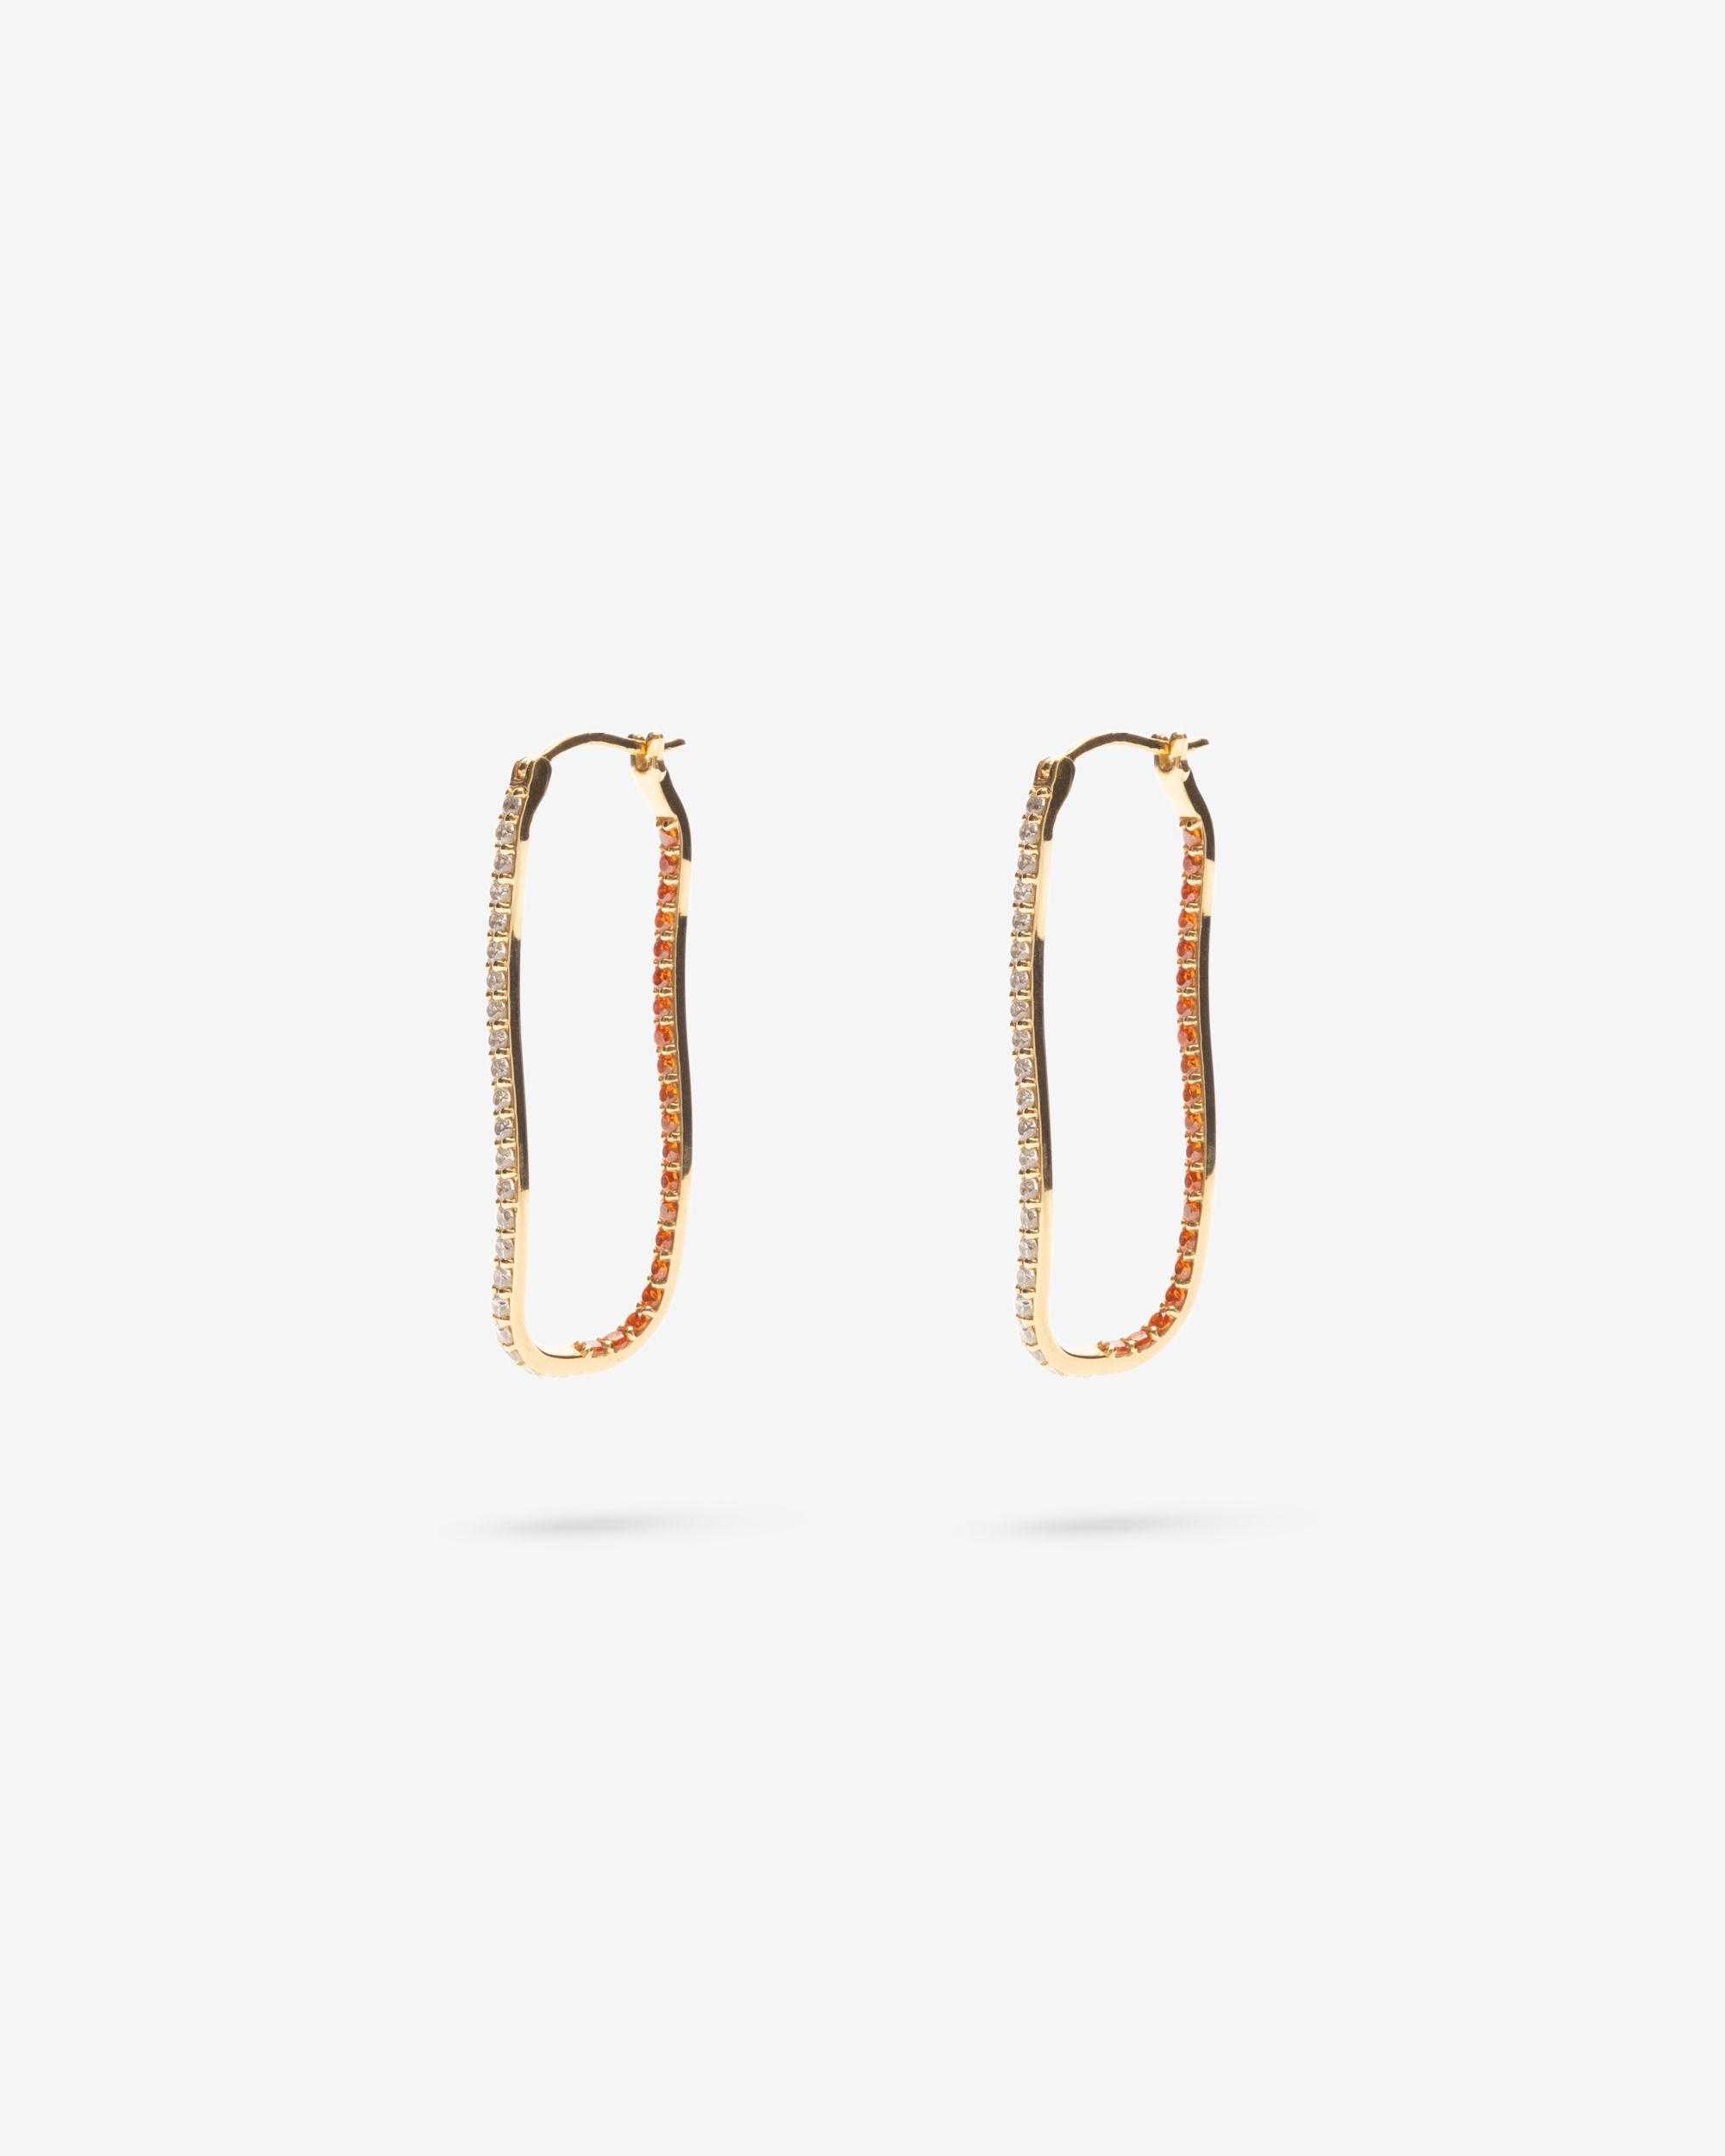 Product Image for Fiasco Paved Hoops, Tangerine